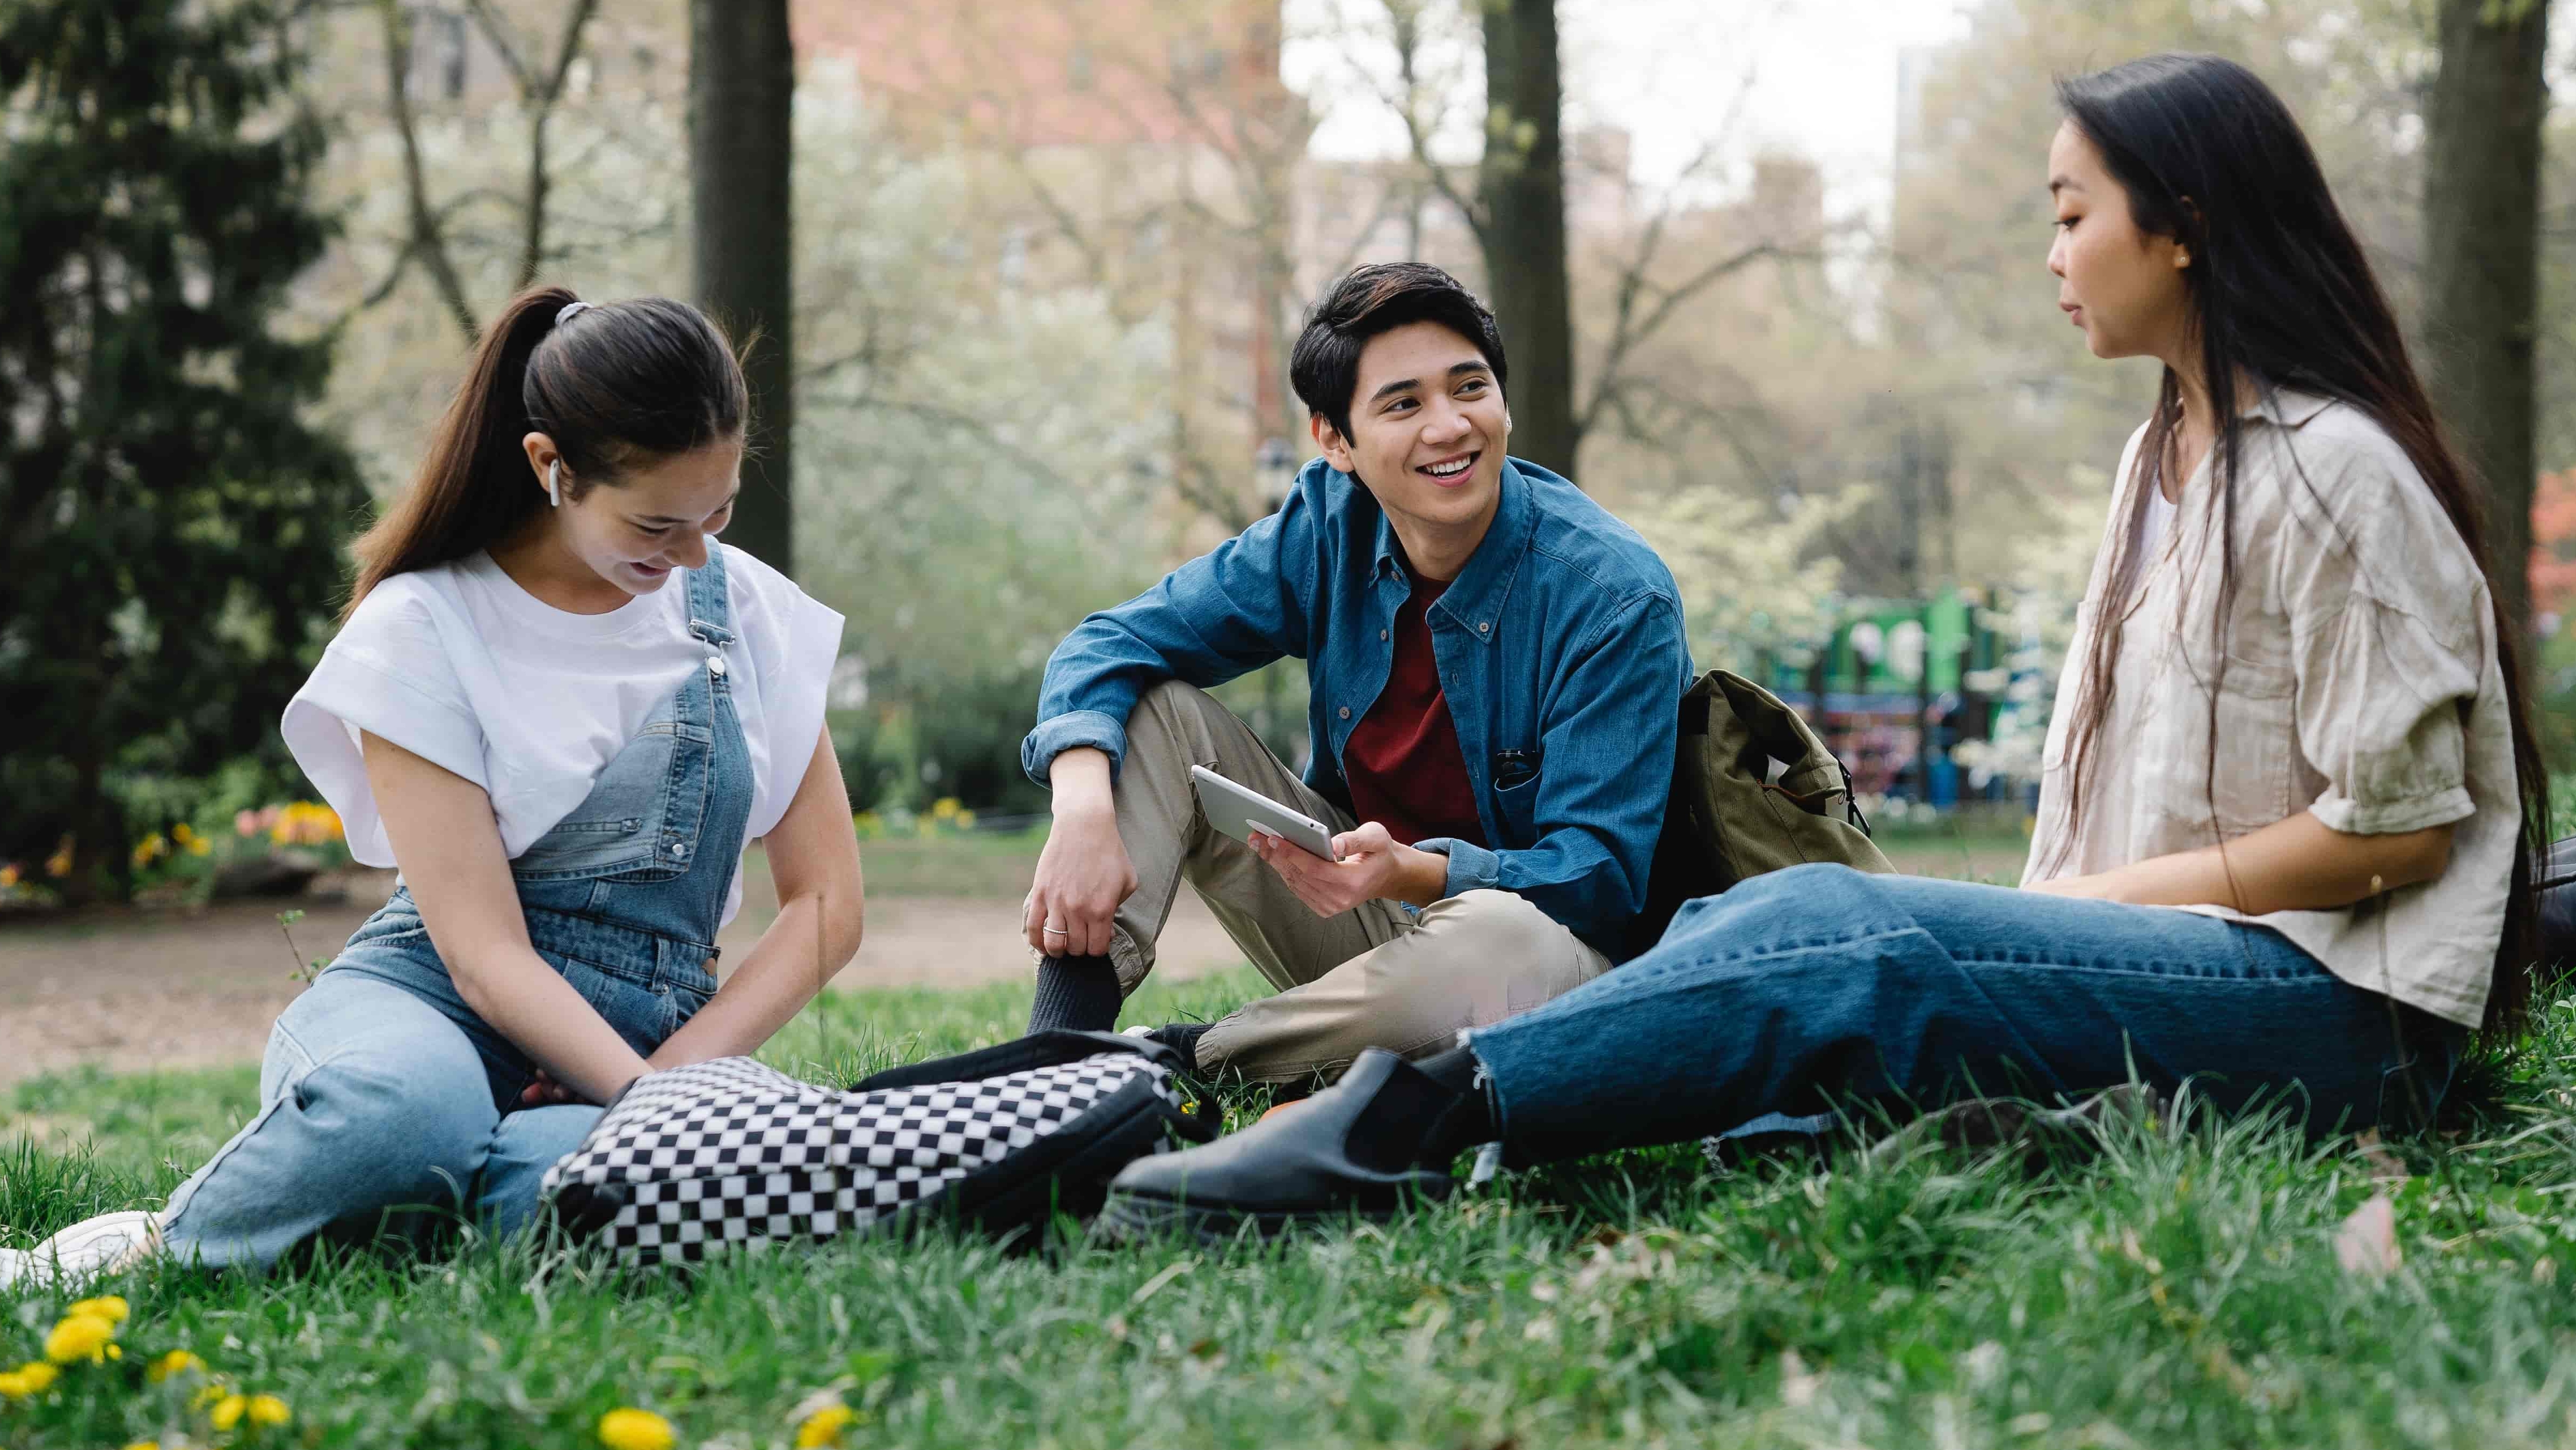 Three students sitting in a semi-circle on the grass having a lighthearted conversation.